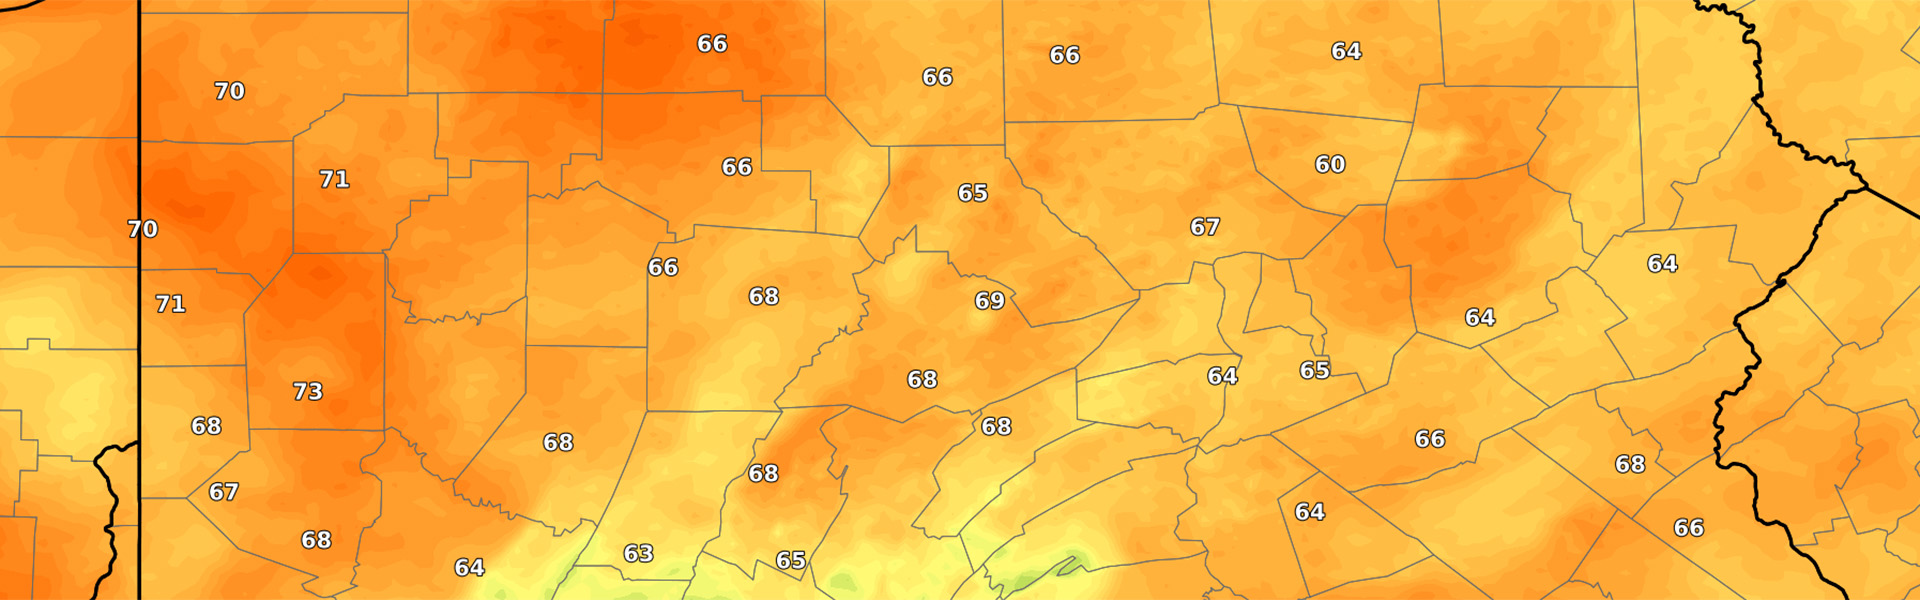 Dewpoint map of PA